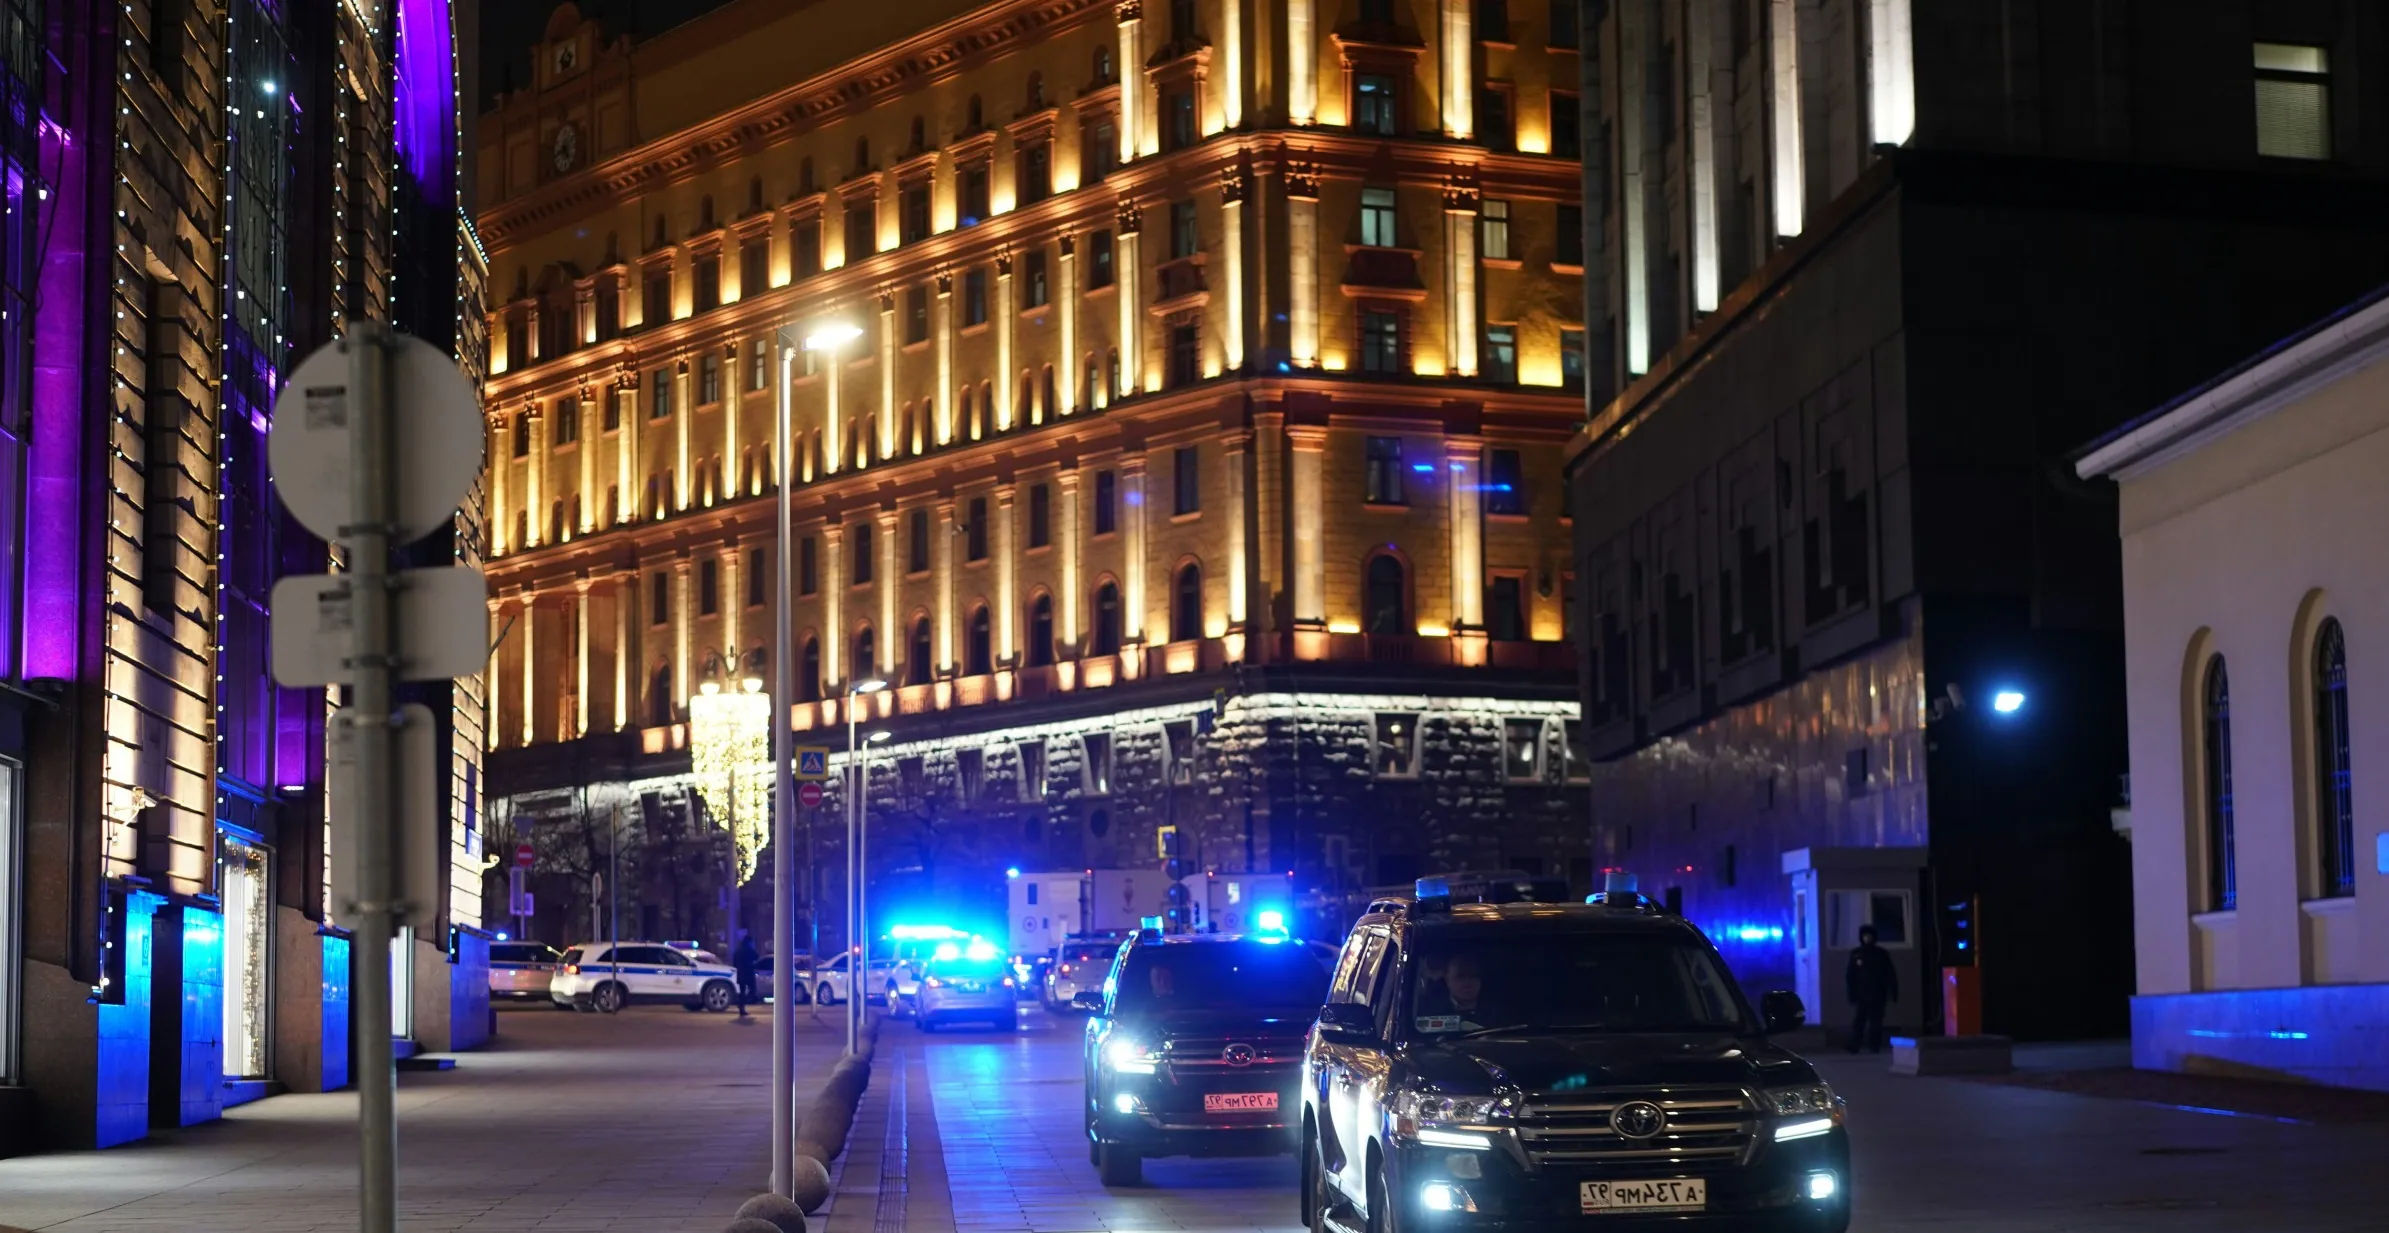 60 Dead, 150 Injured in Moscow Concert Shooting | Latest Updates